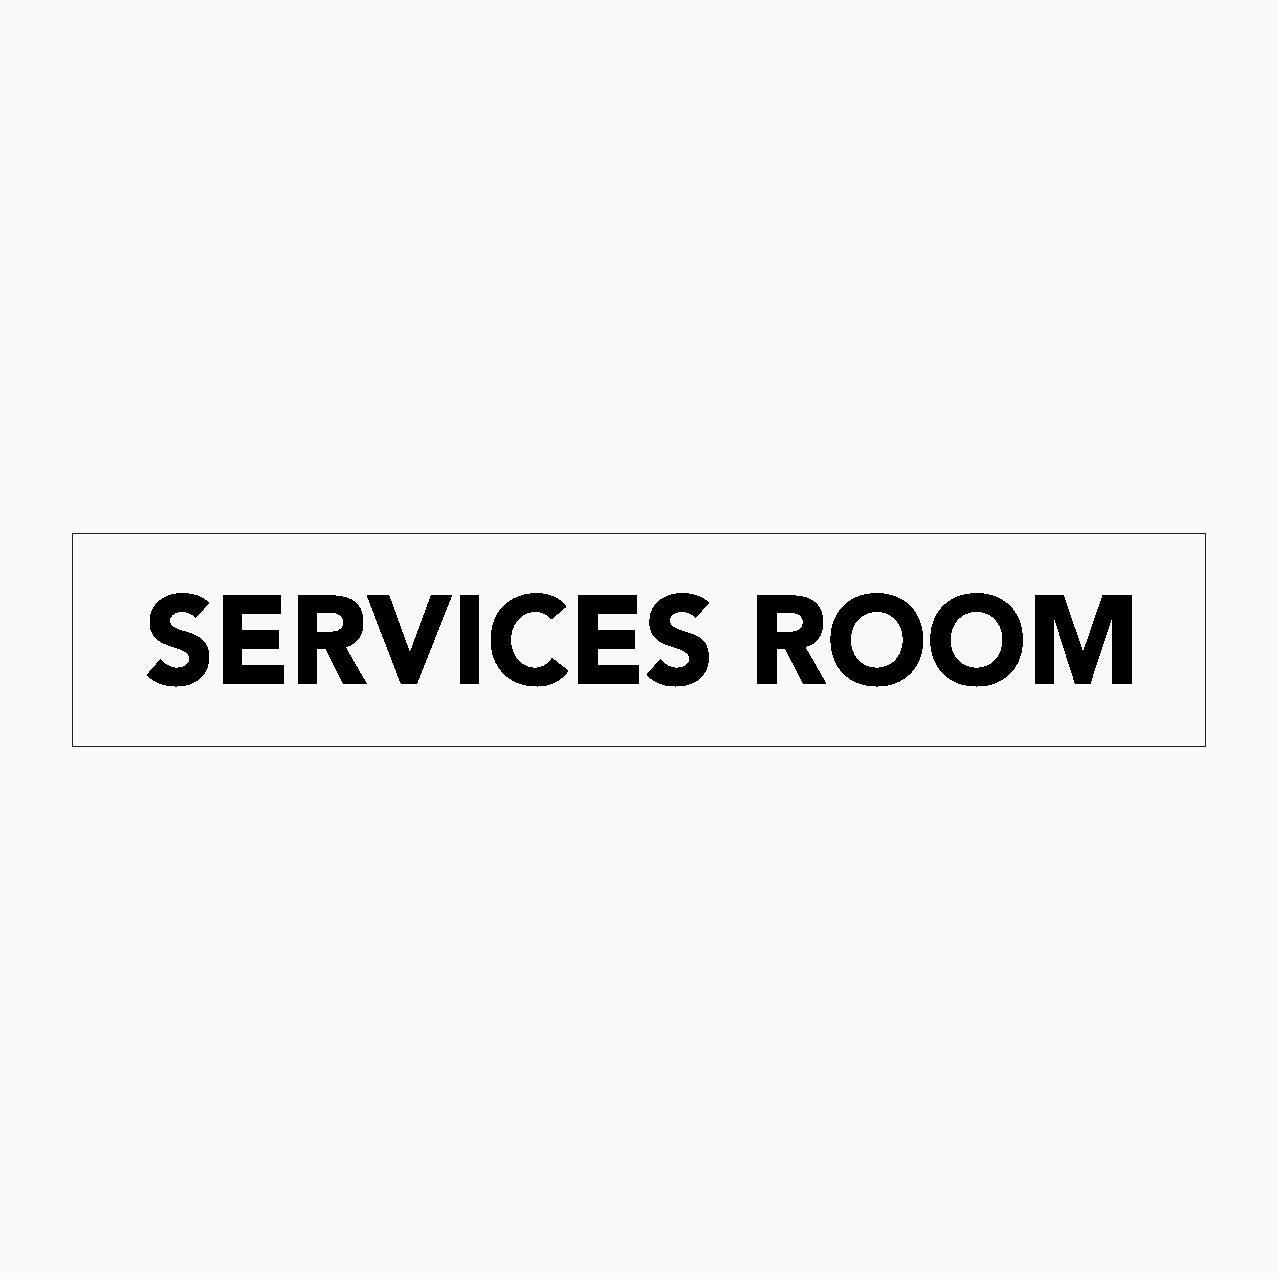 SERVICES ROOM SIGN - STATUTORY SIGN